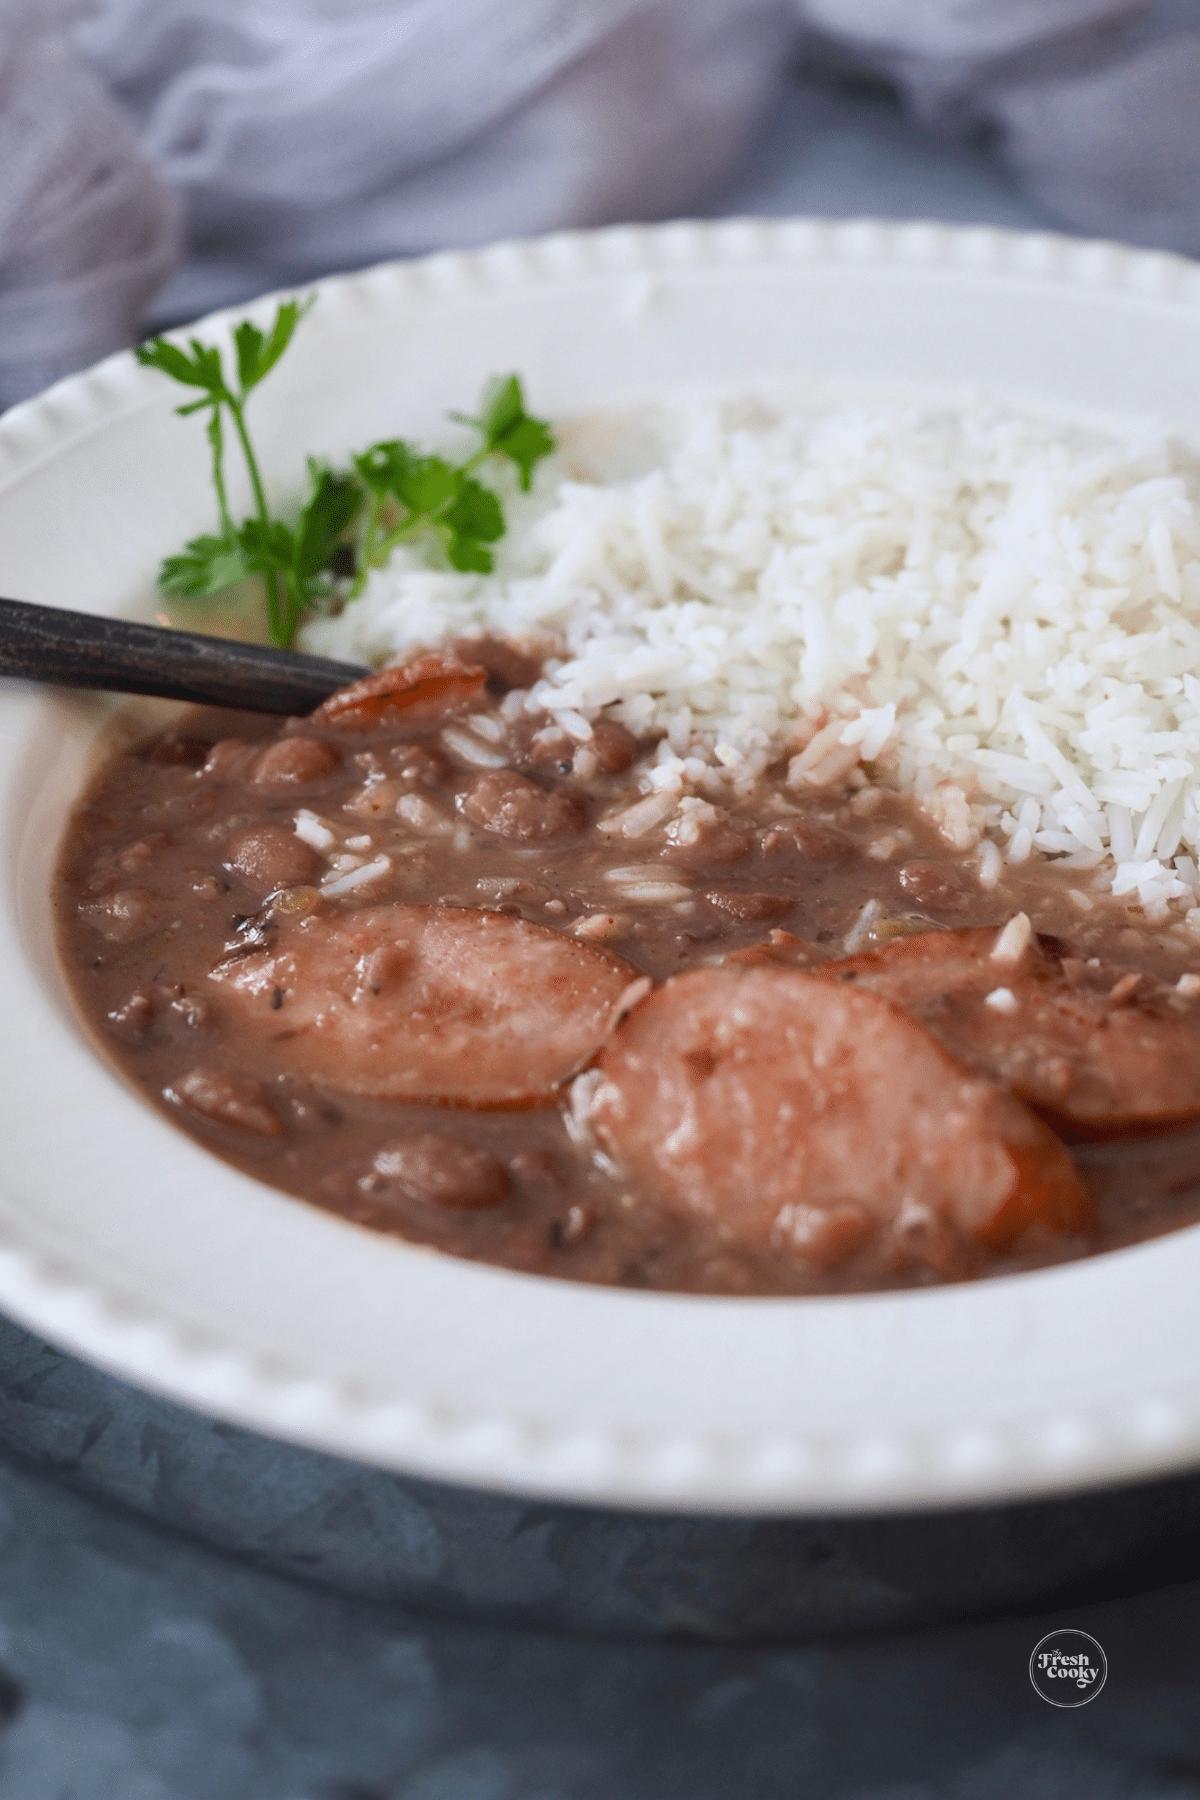 https://www.thefreshcooky.com/wp-content/uploads/2020/02/Slow-Cooker-red-beans-and-rice.png